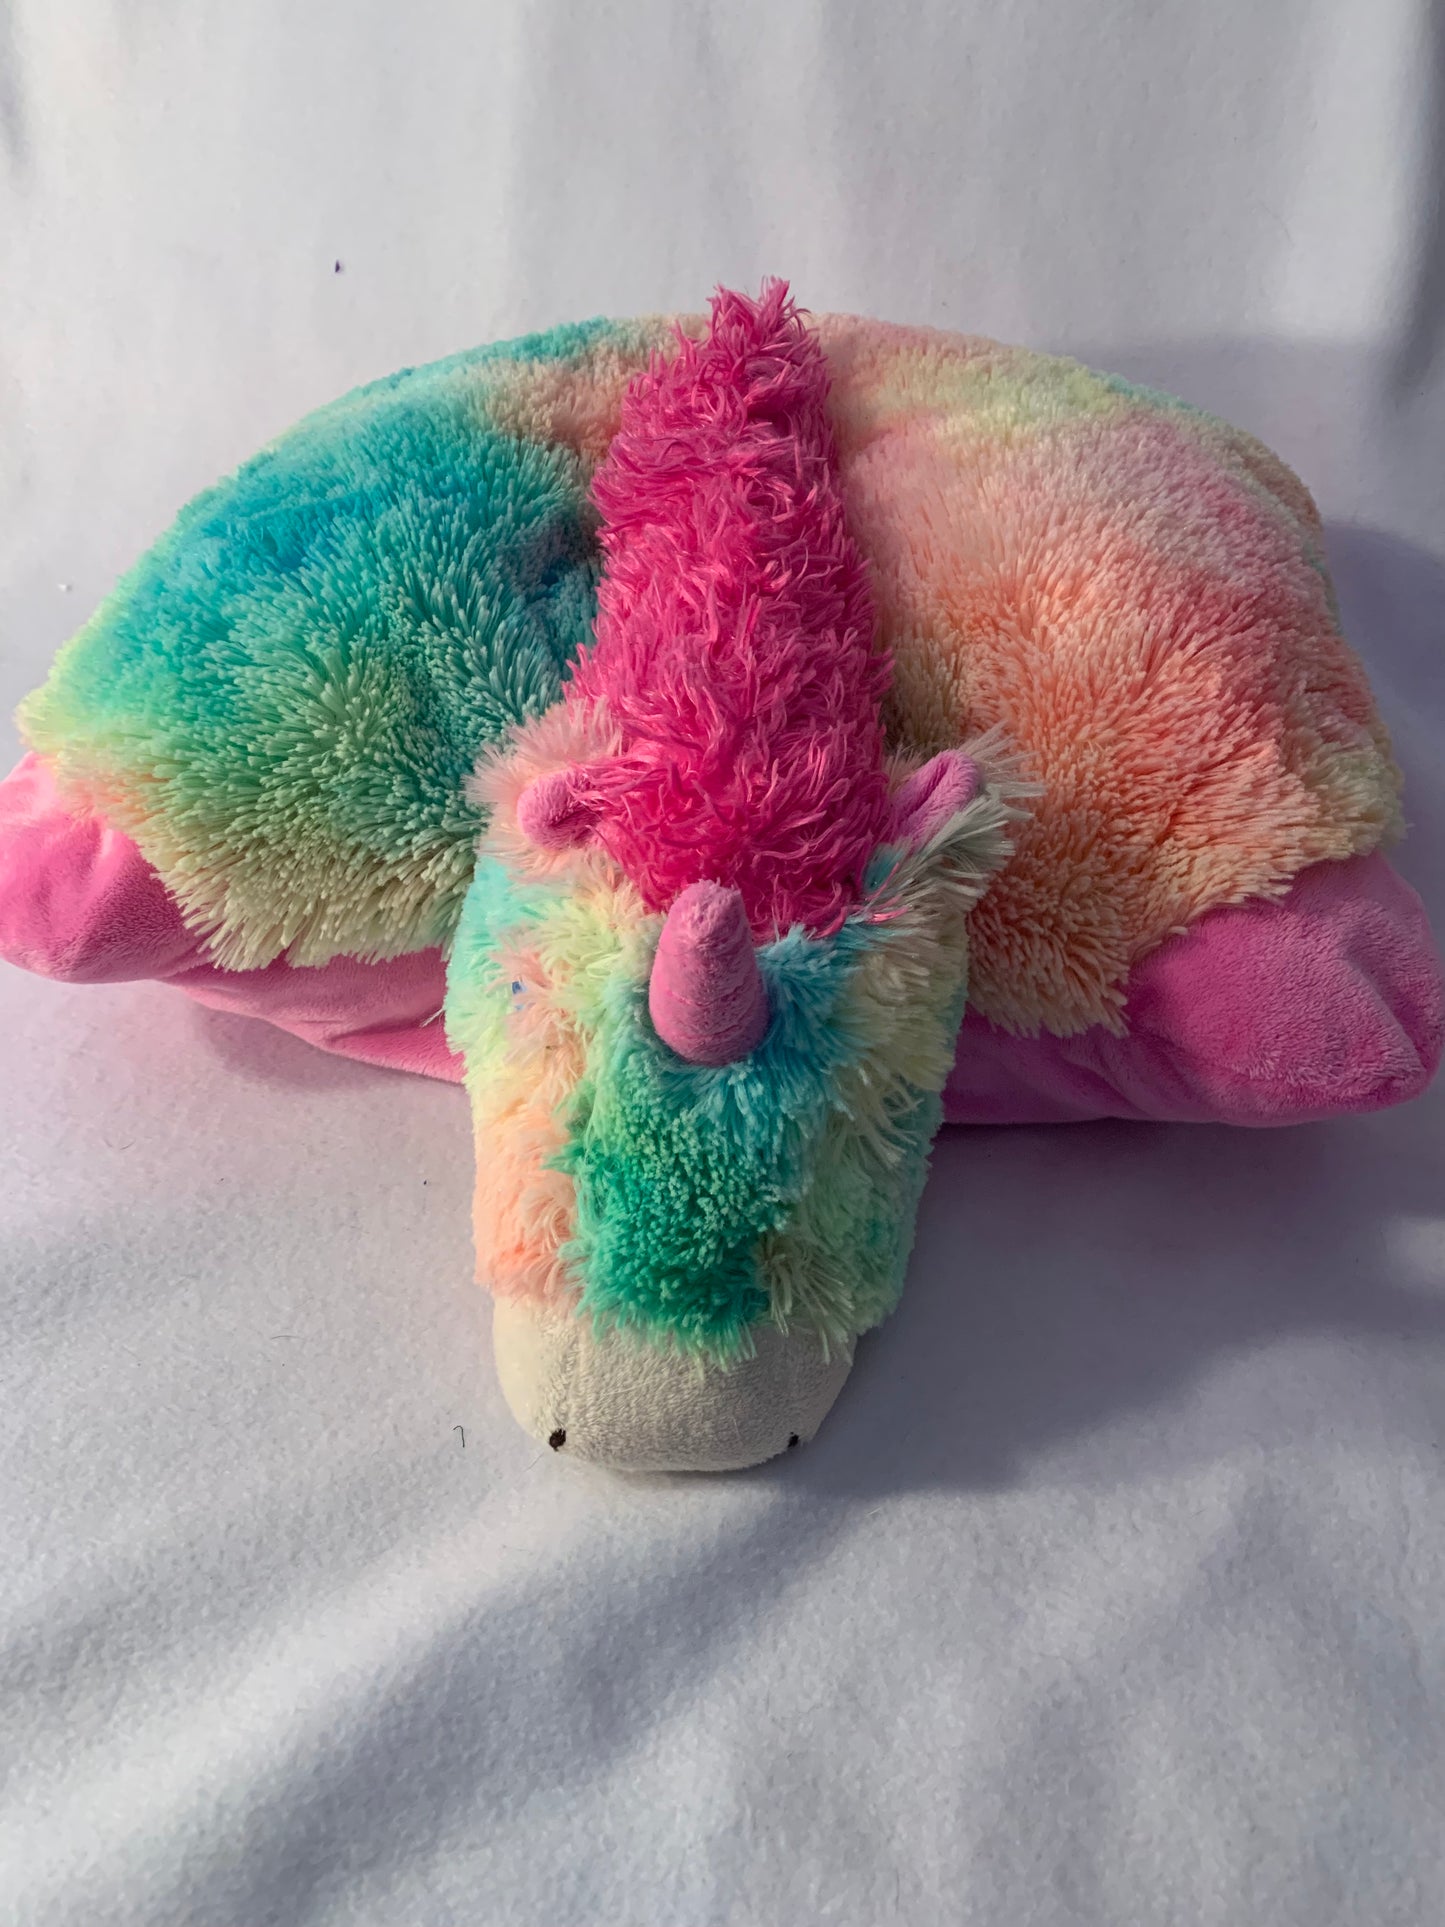 Weighted Lap Pad Pillow Pet with 5 lbs, SENSORY LAP PAD, leopard, octopus, unicorn, moose, bumble bee, cheetah or dog